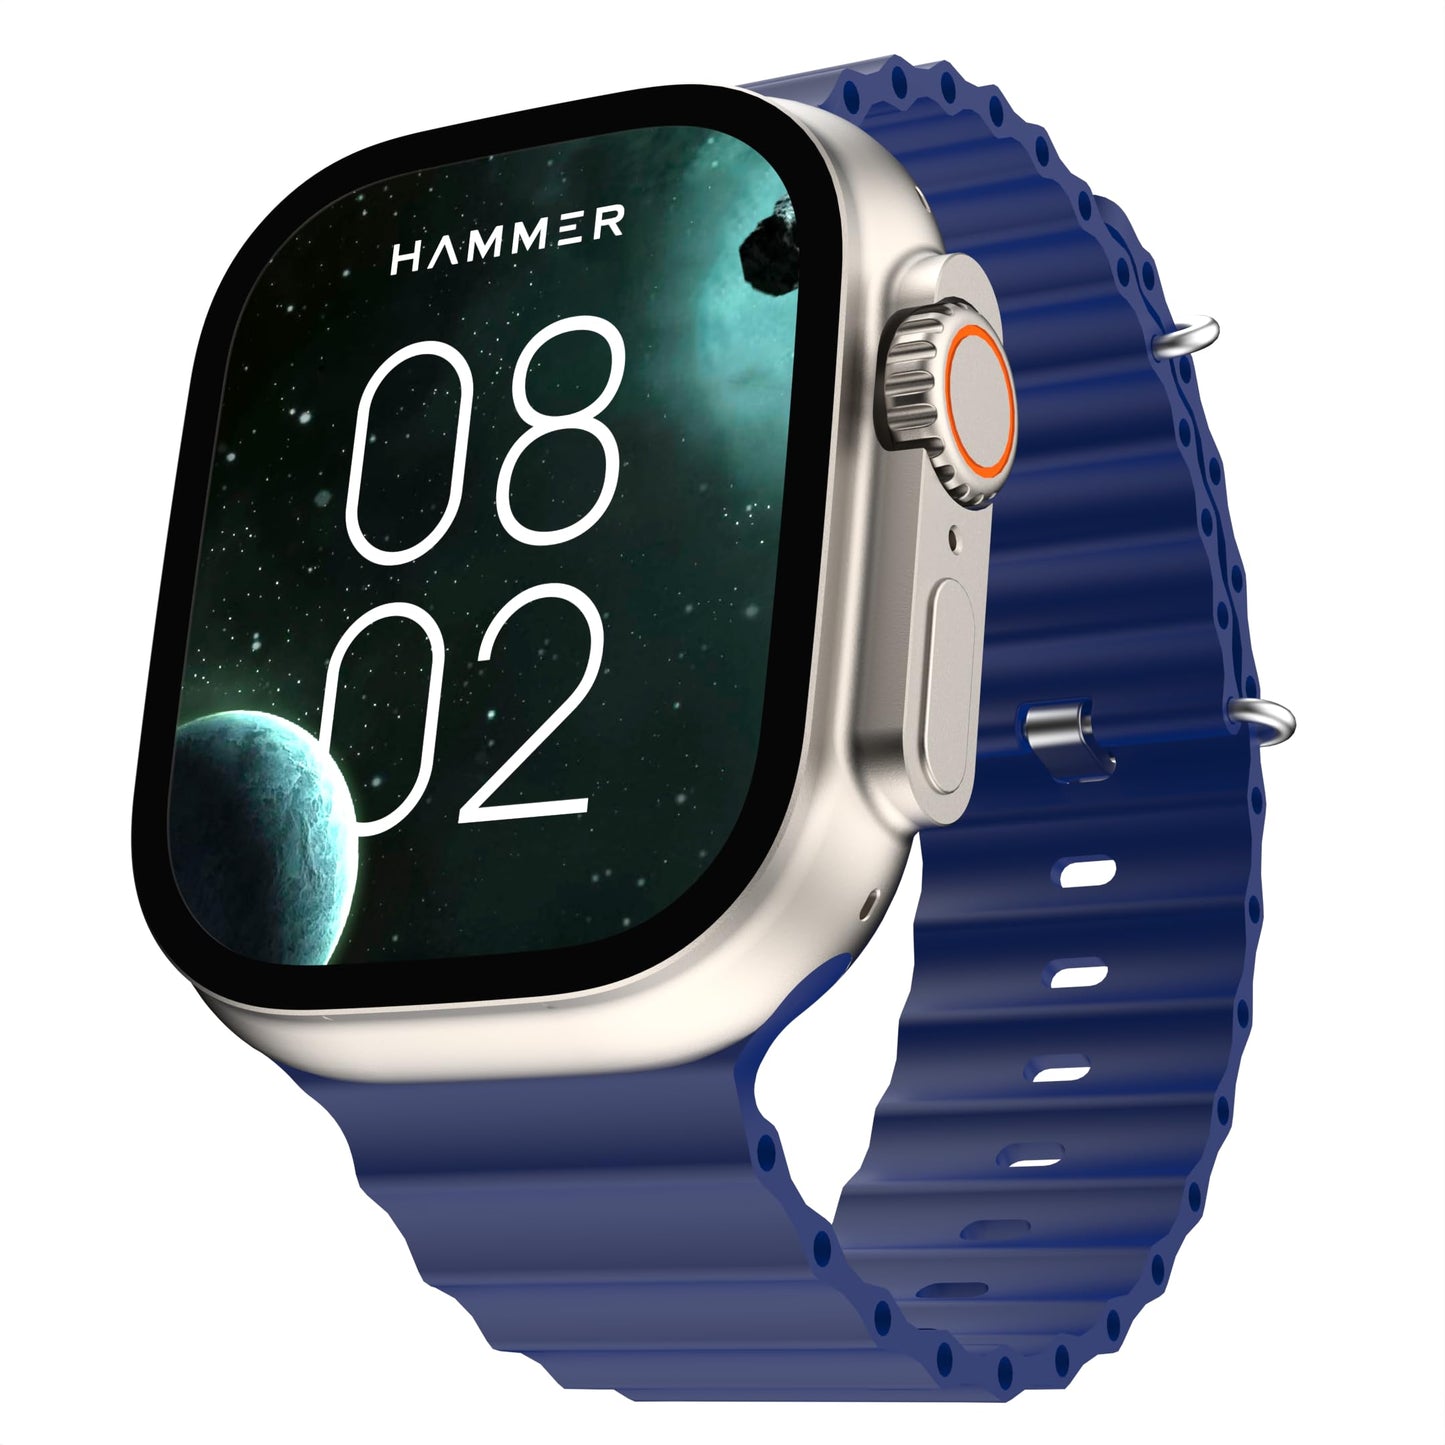 HAMMER Active 2.0 1.95" Display Bluetooth Calling Smart Watch with Metal Body, in-Built Games, Wireless Charging, AOD, 600 NITS Brightness (Blue)